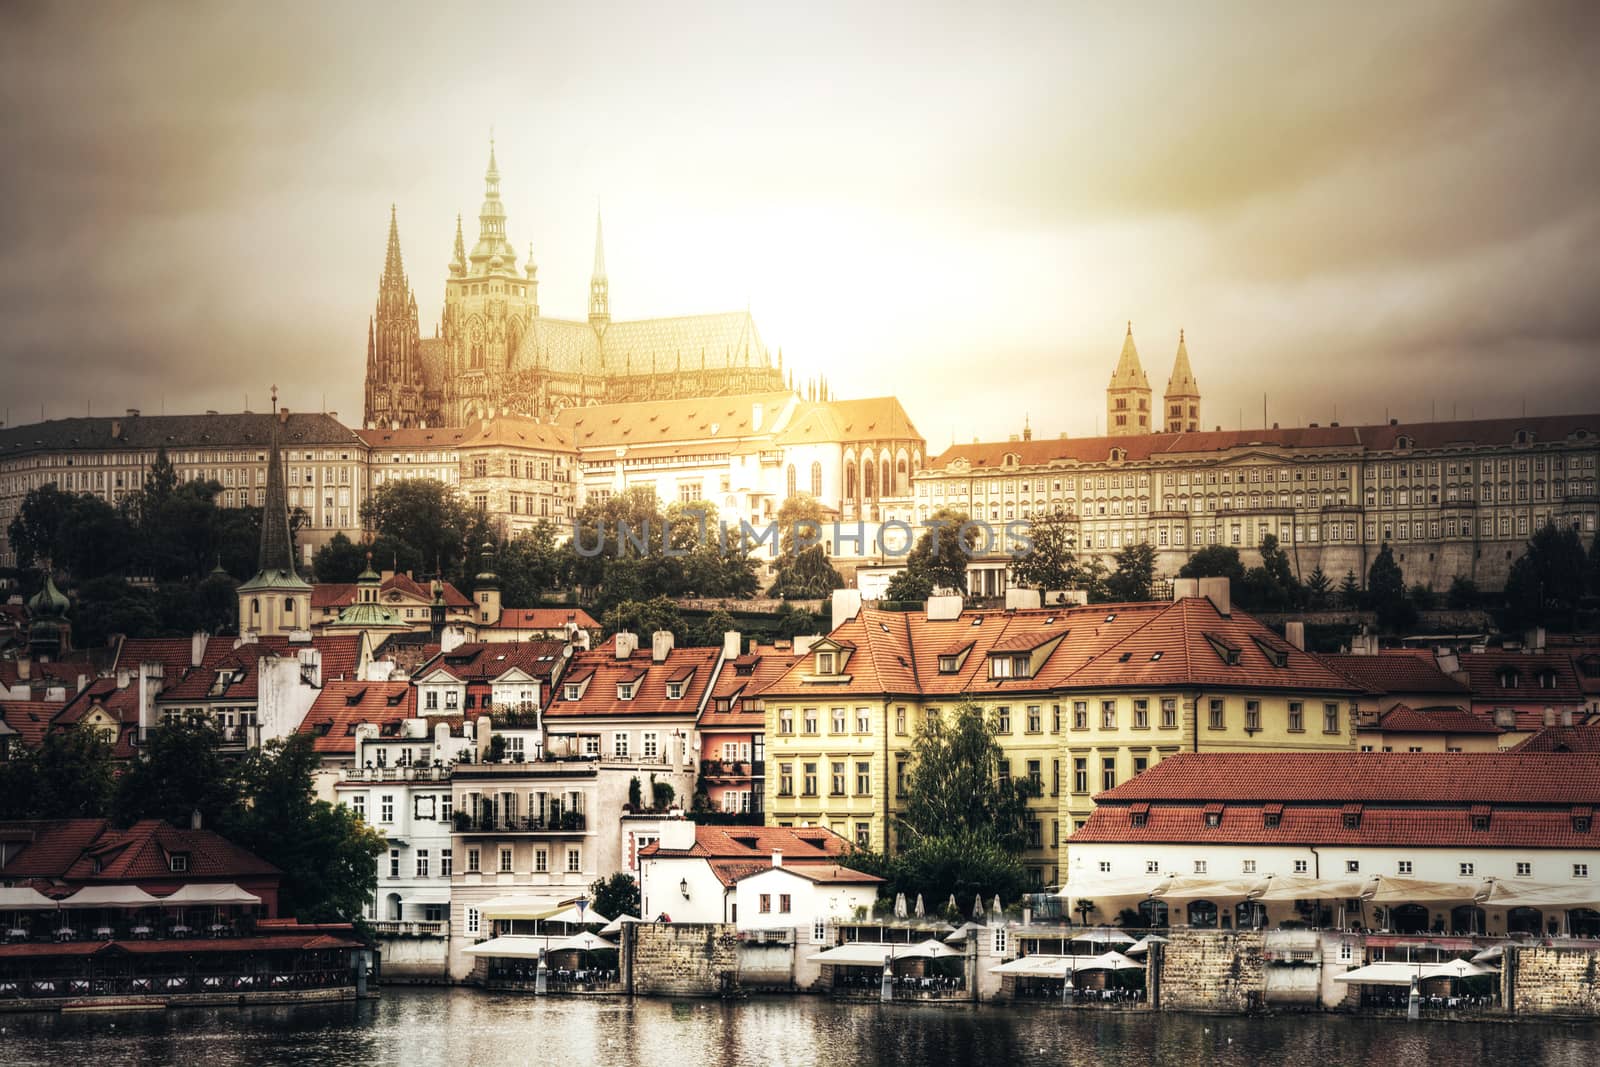 Prague. View of Hradcany with St. Vitus Cathedral and Castle of Prague.